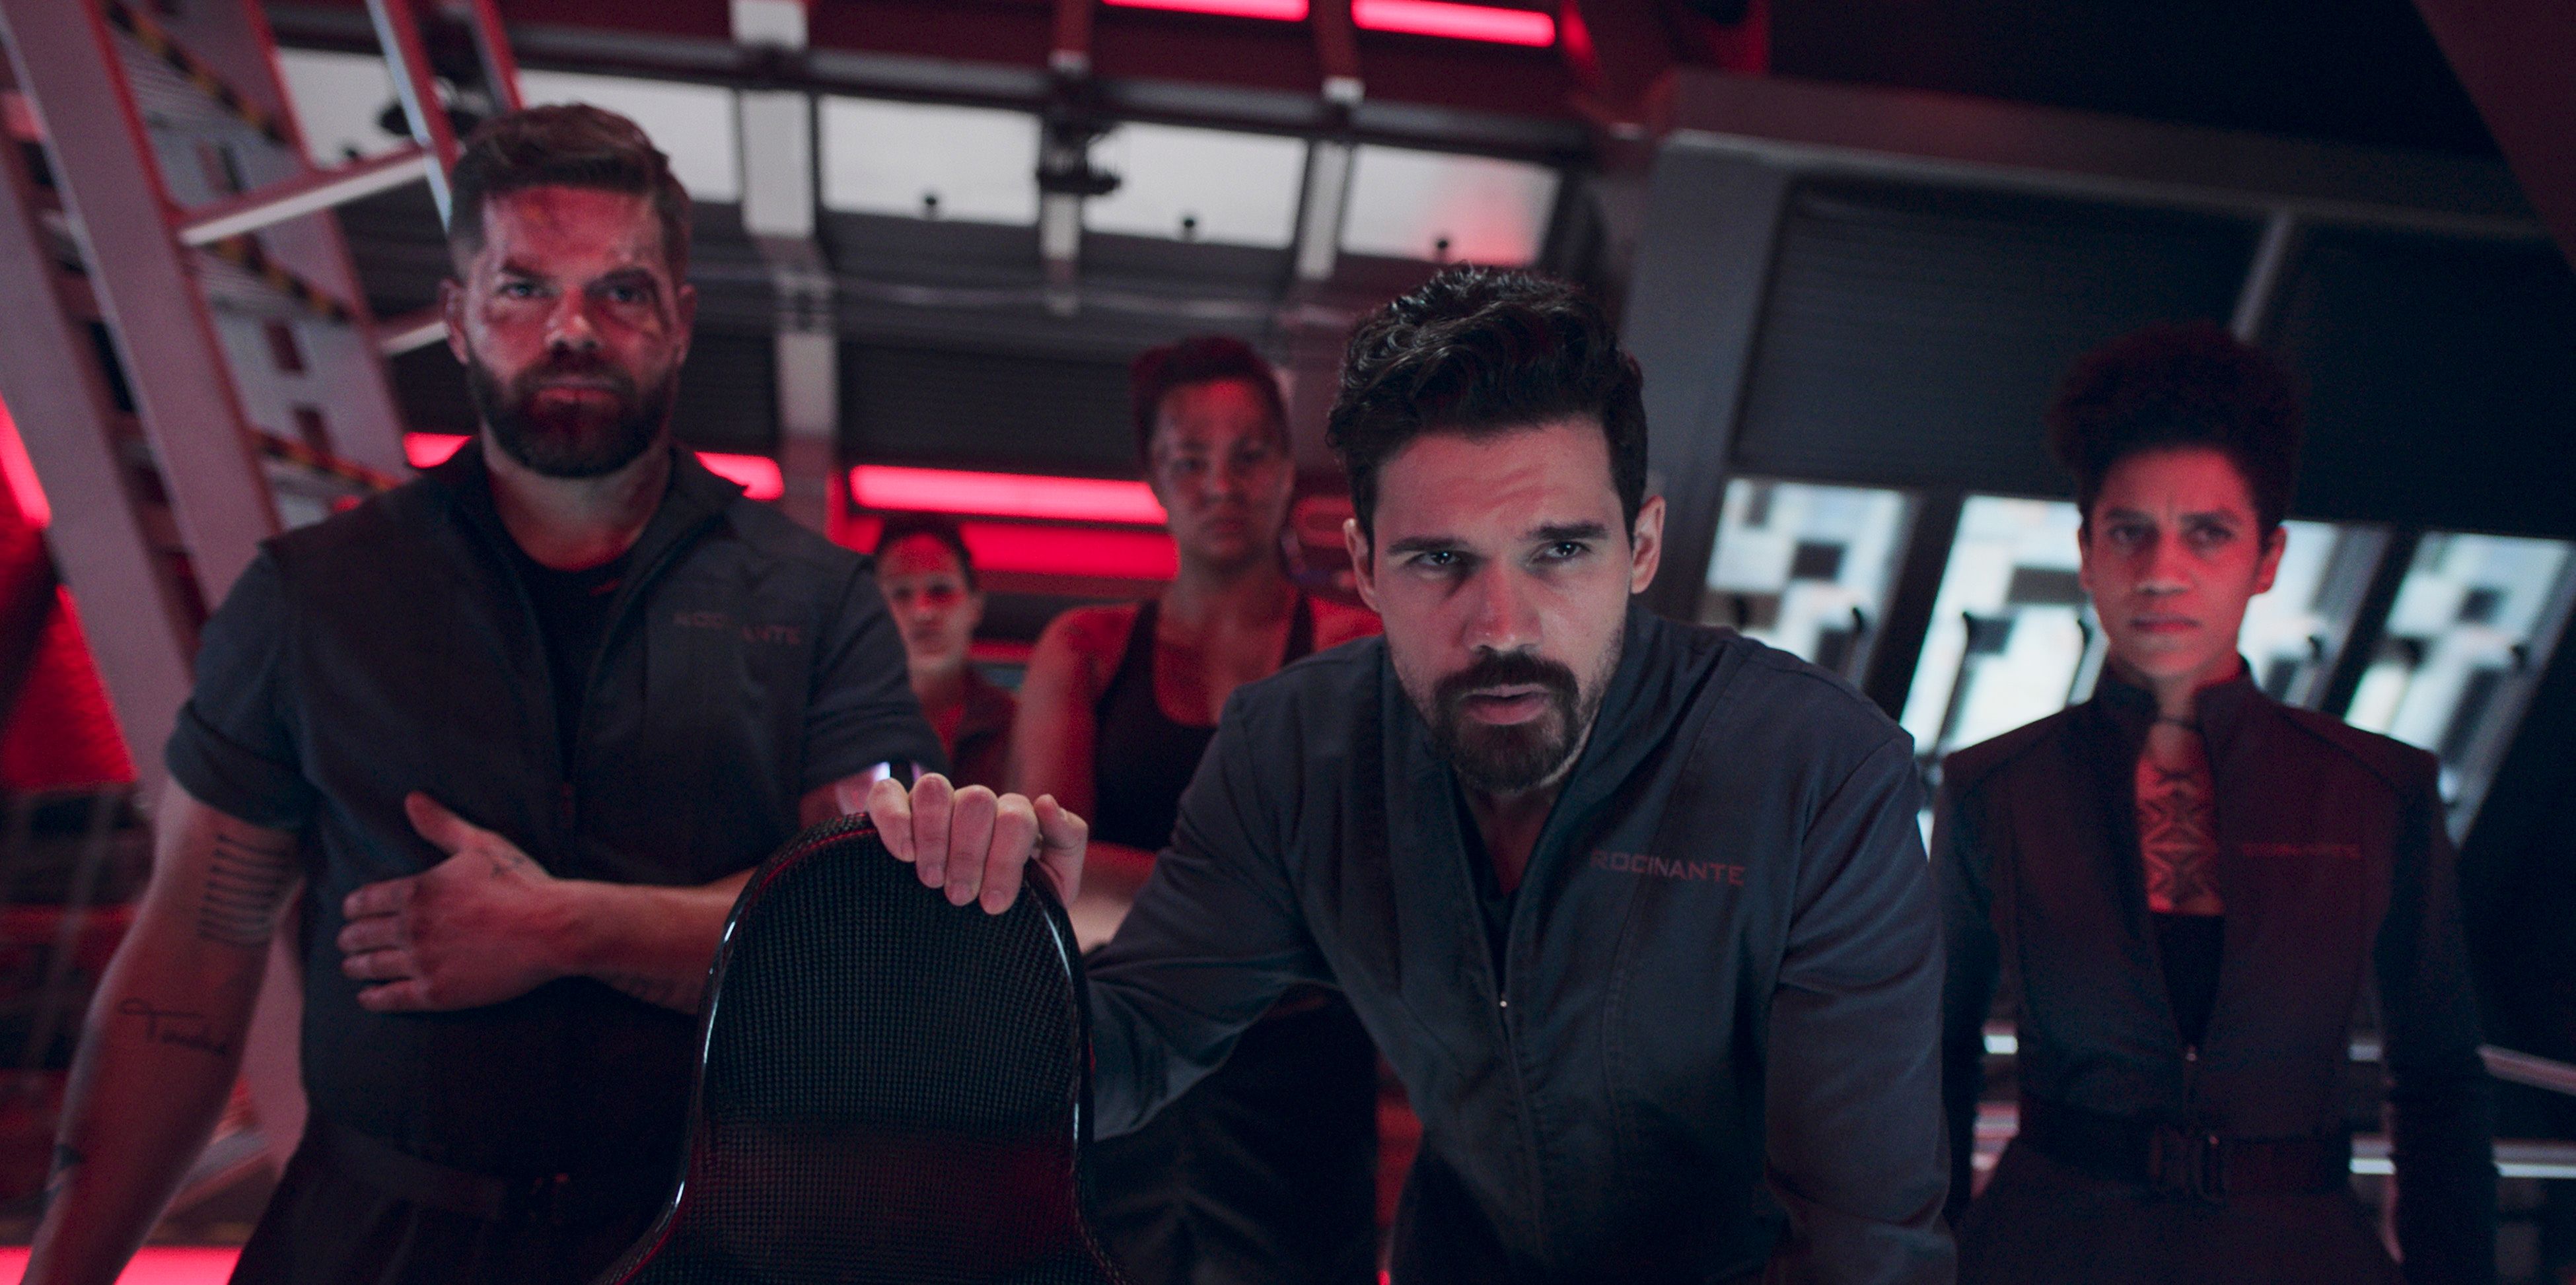 Why The Expanse was cancelled - and the chances of a season 7